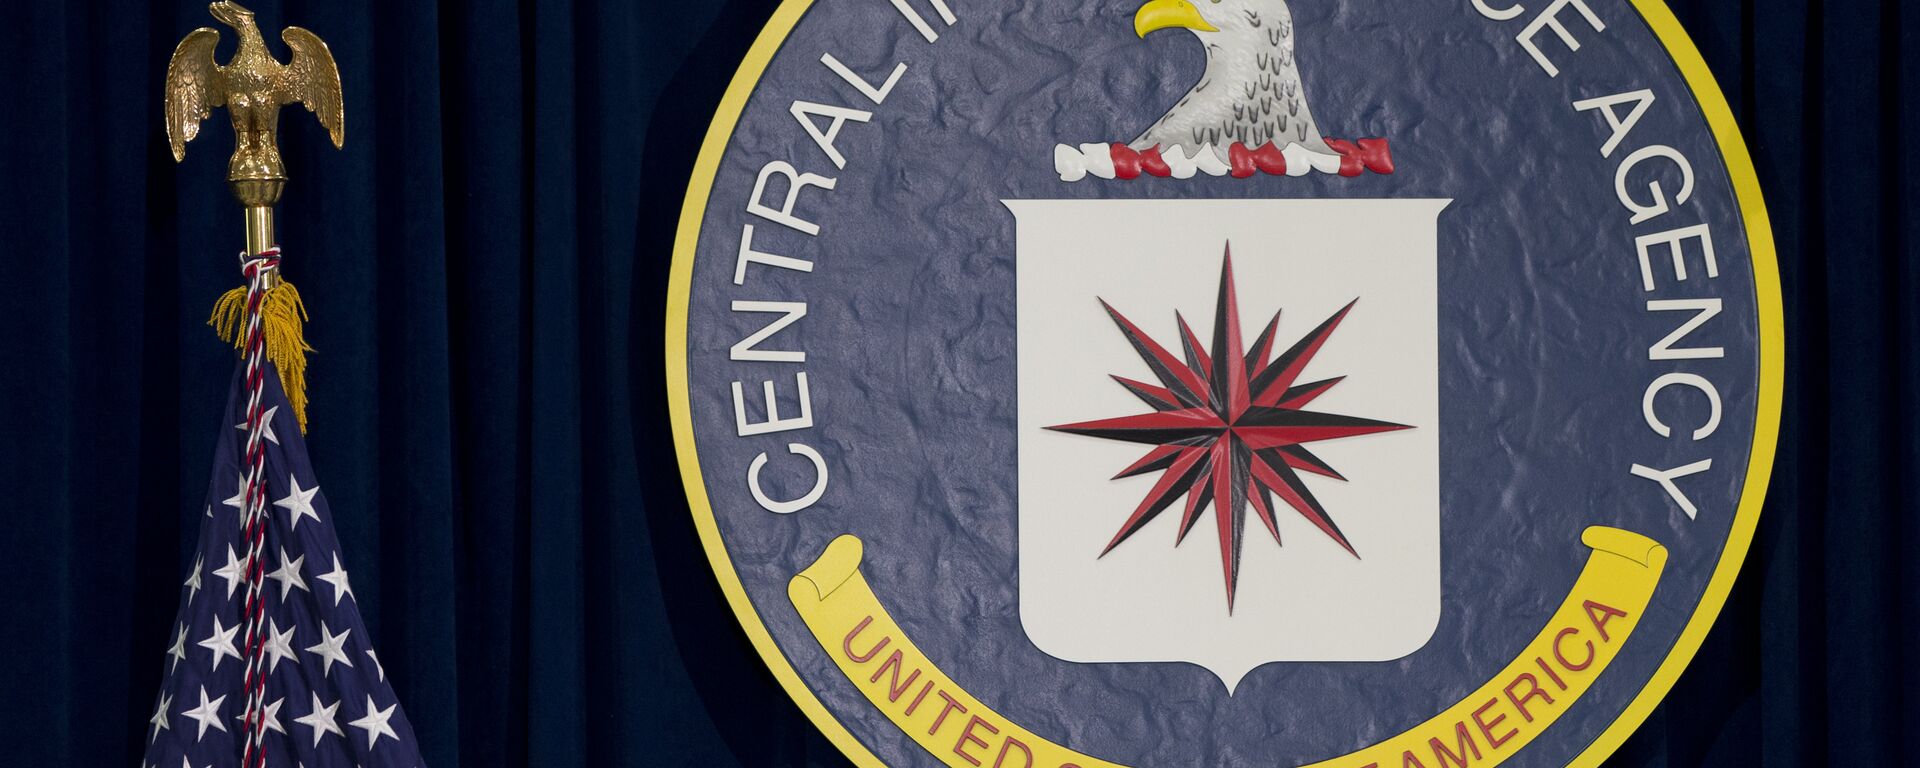 The CIA seal is seen displayed before President Barack Obama speaks at the CIA Headquarters in Langley, Va., Wednesday, April 13, 2016 - Sputnik International, 1920, 24.06.2017